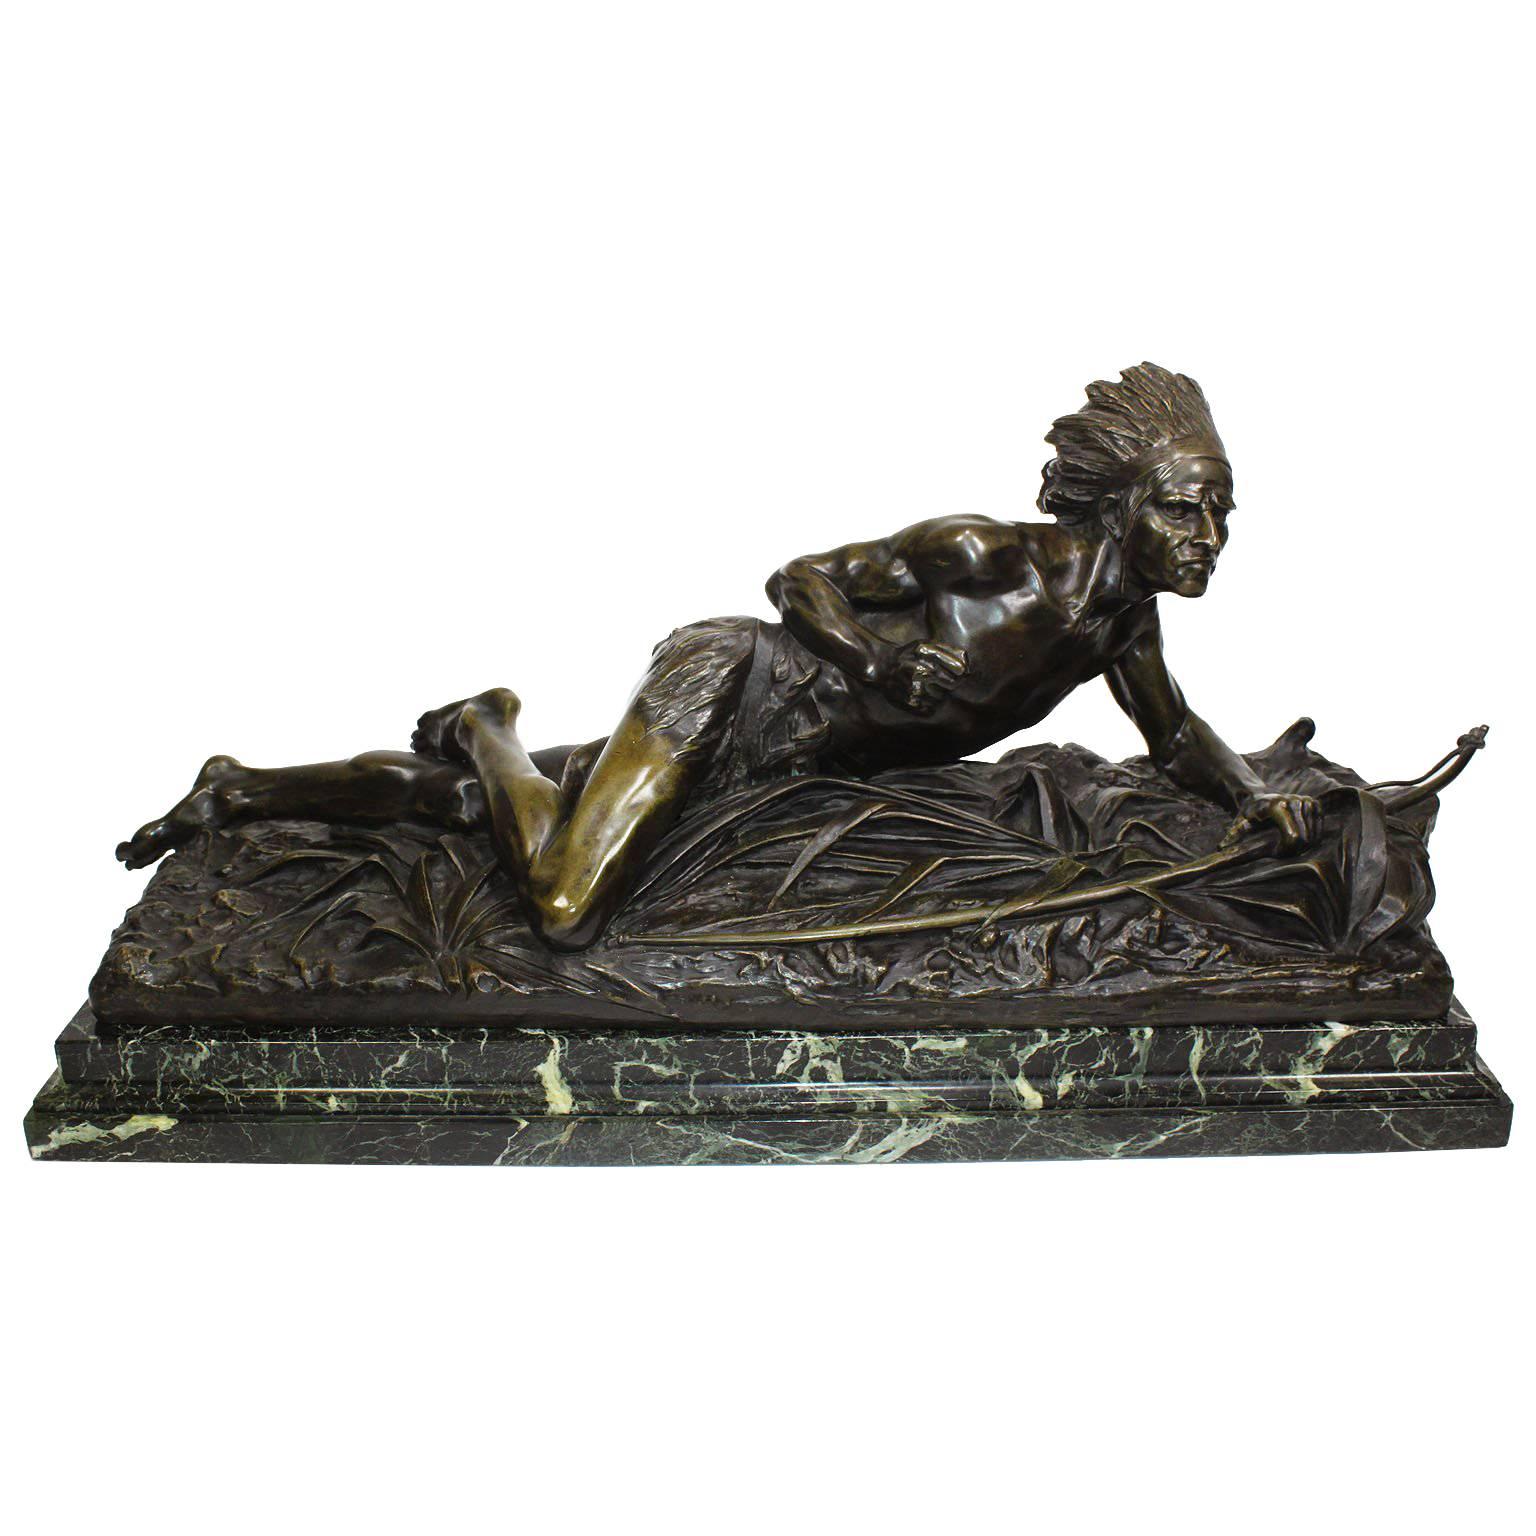 French Bronze Sculpture "Crouching Native American Indian" E. Drouot For Sale